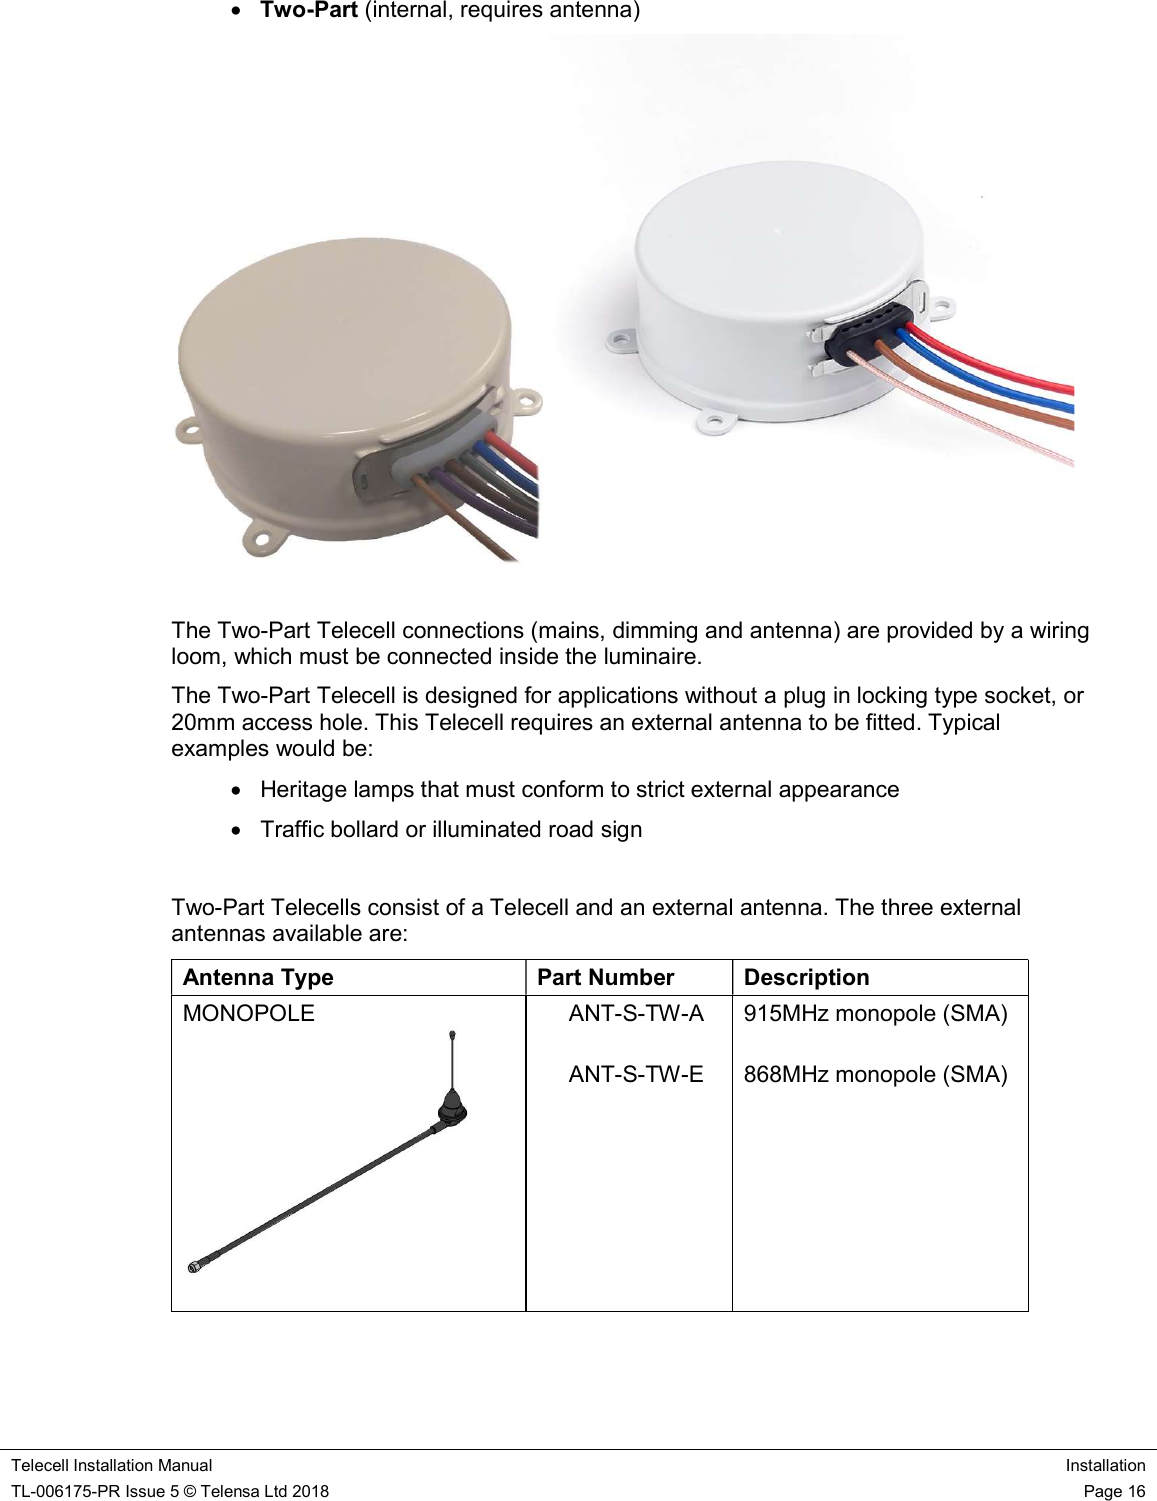    Telecell Installation Manual Installation TL-006175-PR Issue 5 © Telensa Ltd 2018    Page 16   Two-Part (internal, requires antenna)   The Two-Part Telecell connections (mains, dimming and antenna) are provided by a wiring loom, which must be connected inside the luminaire. The Two-Part Telecell is designed for applications without a plug in locking type socket, or 20mm access hole. This Telecell requires an external antenna to be fitted. Typical examples would be:   Heritage lamps that must conform to strict external appearance   Traffic bollard or illuminated road sign  Two-Part Telecells consist of a Telecell and an external antenna. The three external antennas available are: Antenna Type  Part Number  Description MONOPOLE                  ANT-S-TW-A       ANT-S-TW-E  915MHz monopole (SMA)  868MHz monopole (SMA) 